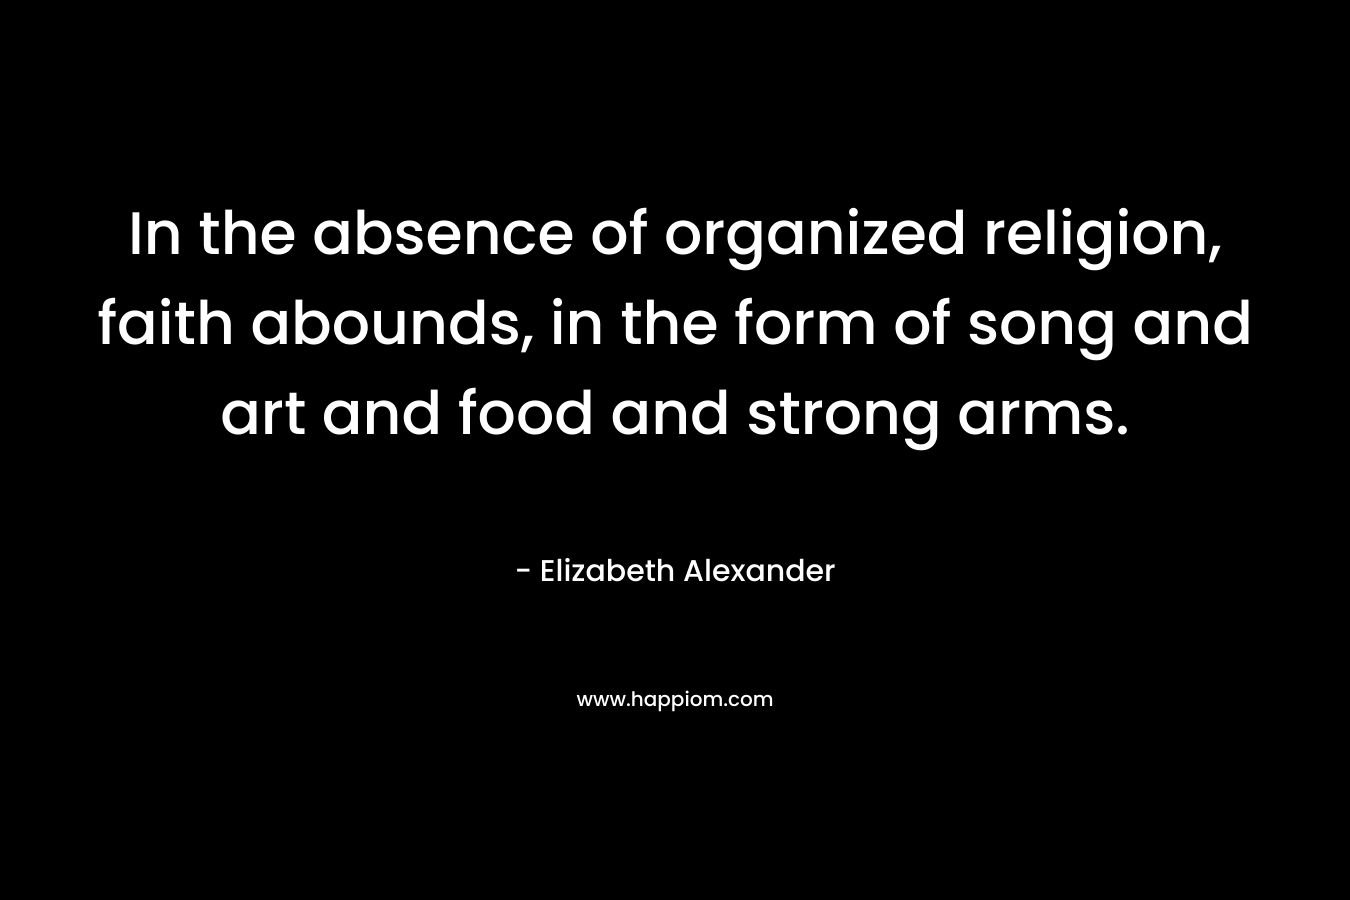 In the absence of organized religion, faith abounds, in the form of song and art and food and strong arms. – Elizabeth Alexander